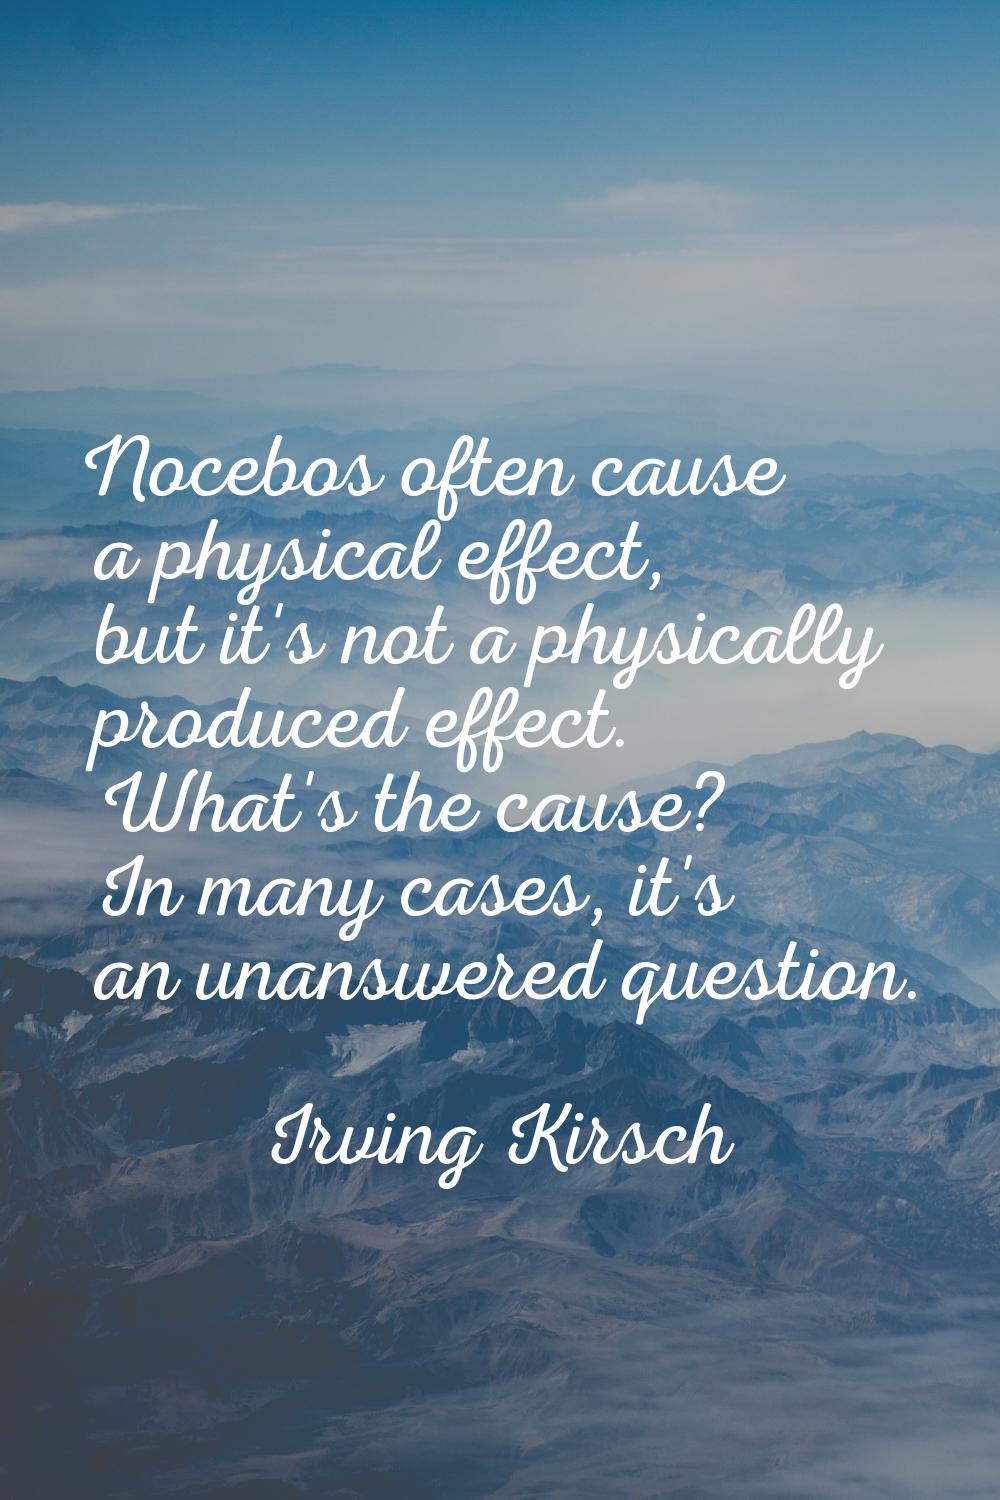 Nocebos often cause a physical effect, but it's not a physically produced effect. What's the cause?